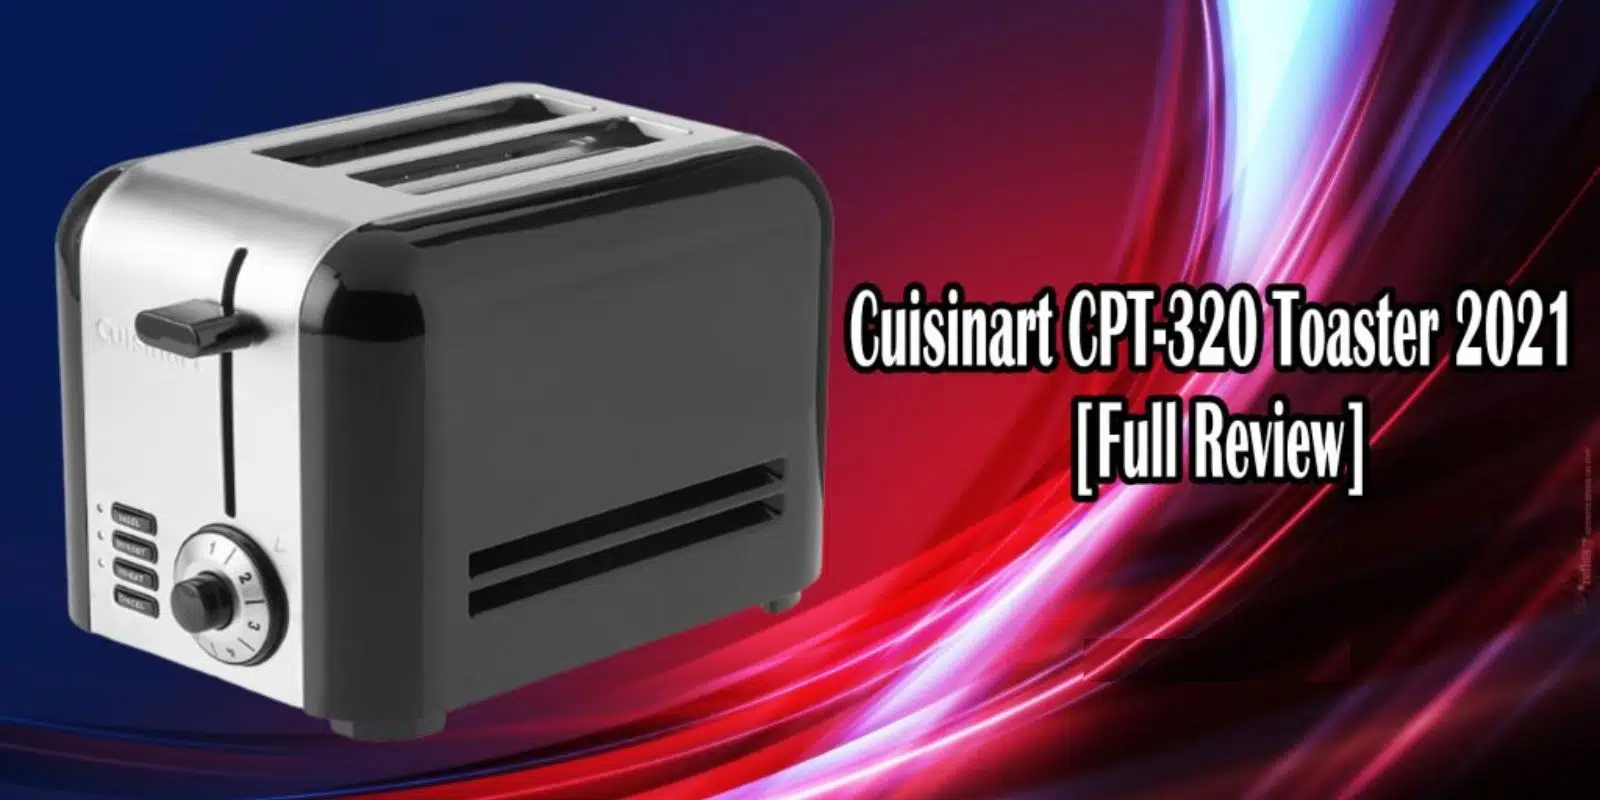 Cuisinart CPT-320 Toaster [Full Review]